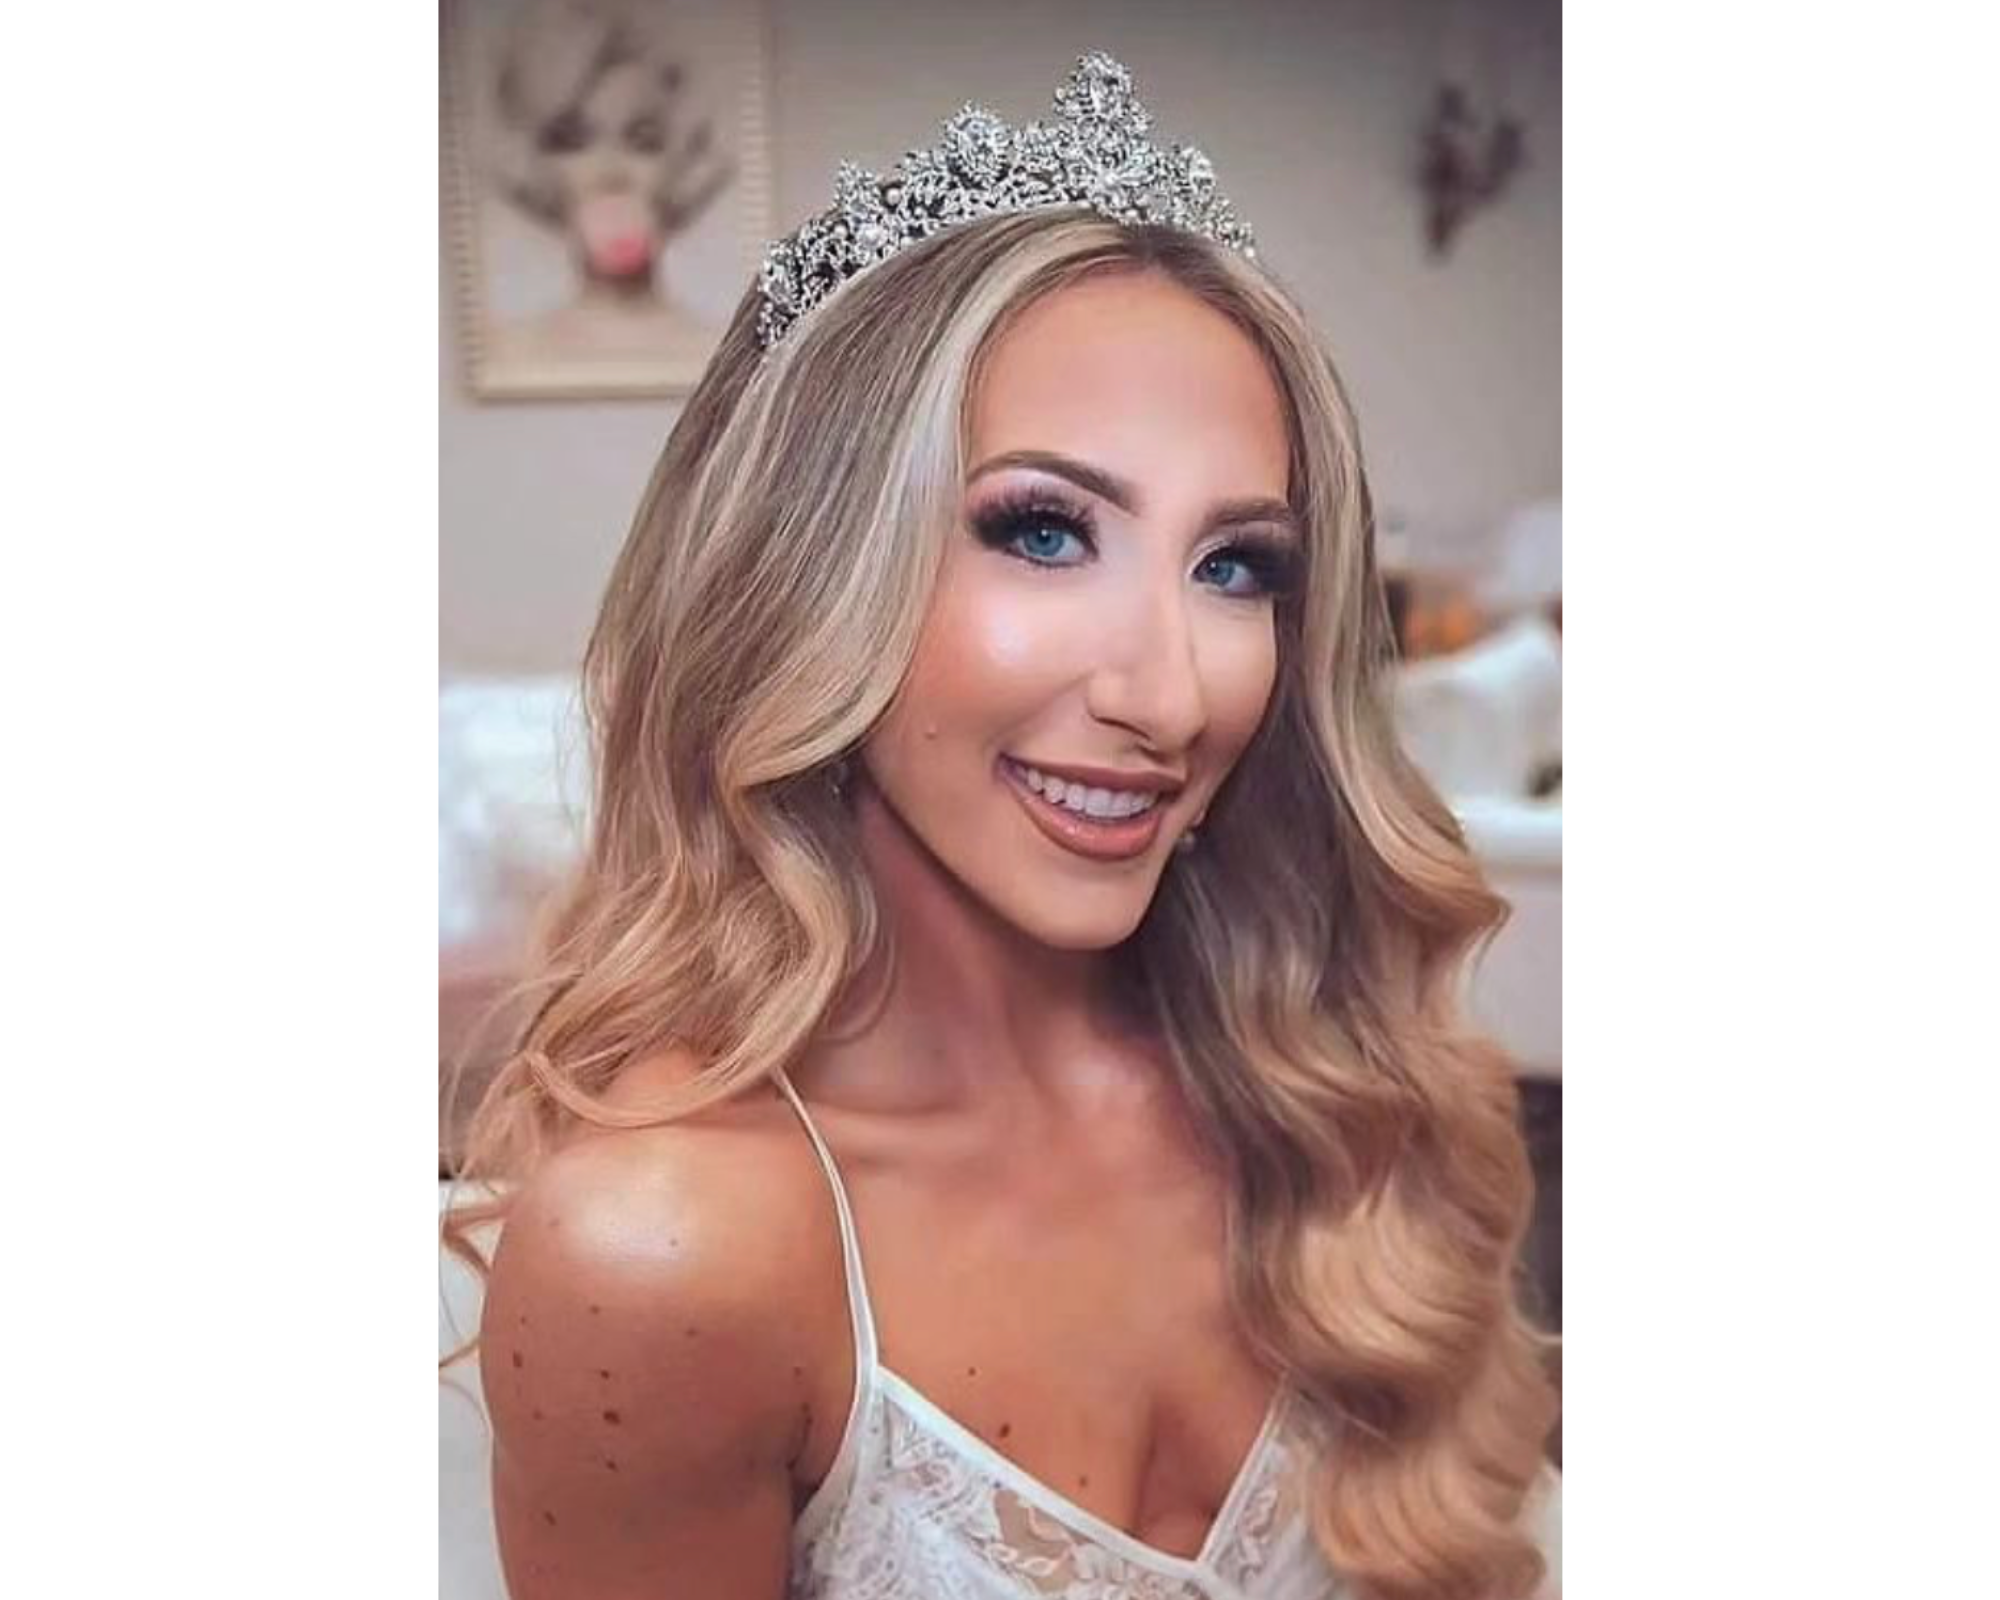 A lovely bride with her blond hair in soft waves wearing a Swarovski crystal wedding tiara.